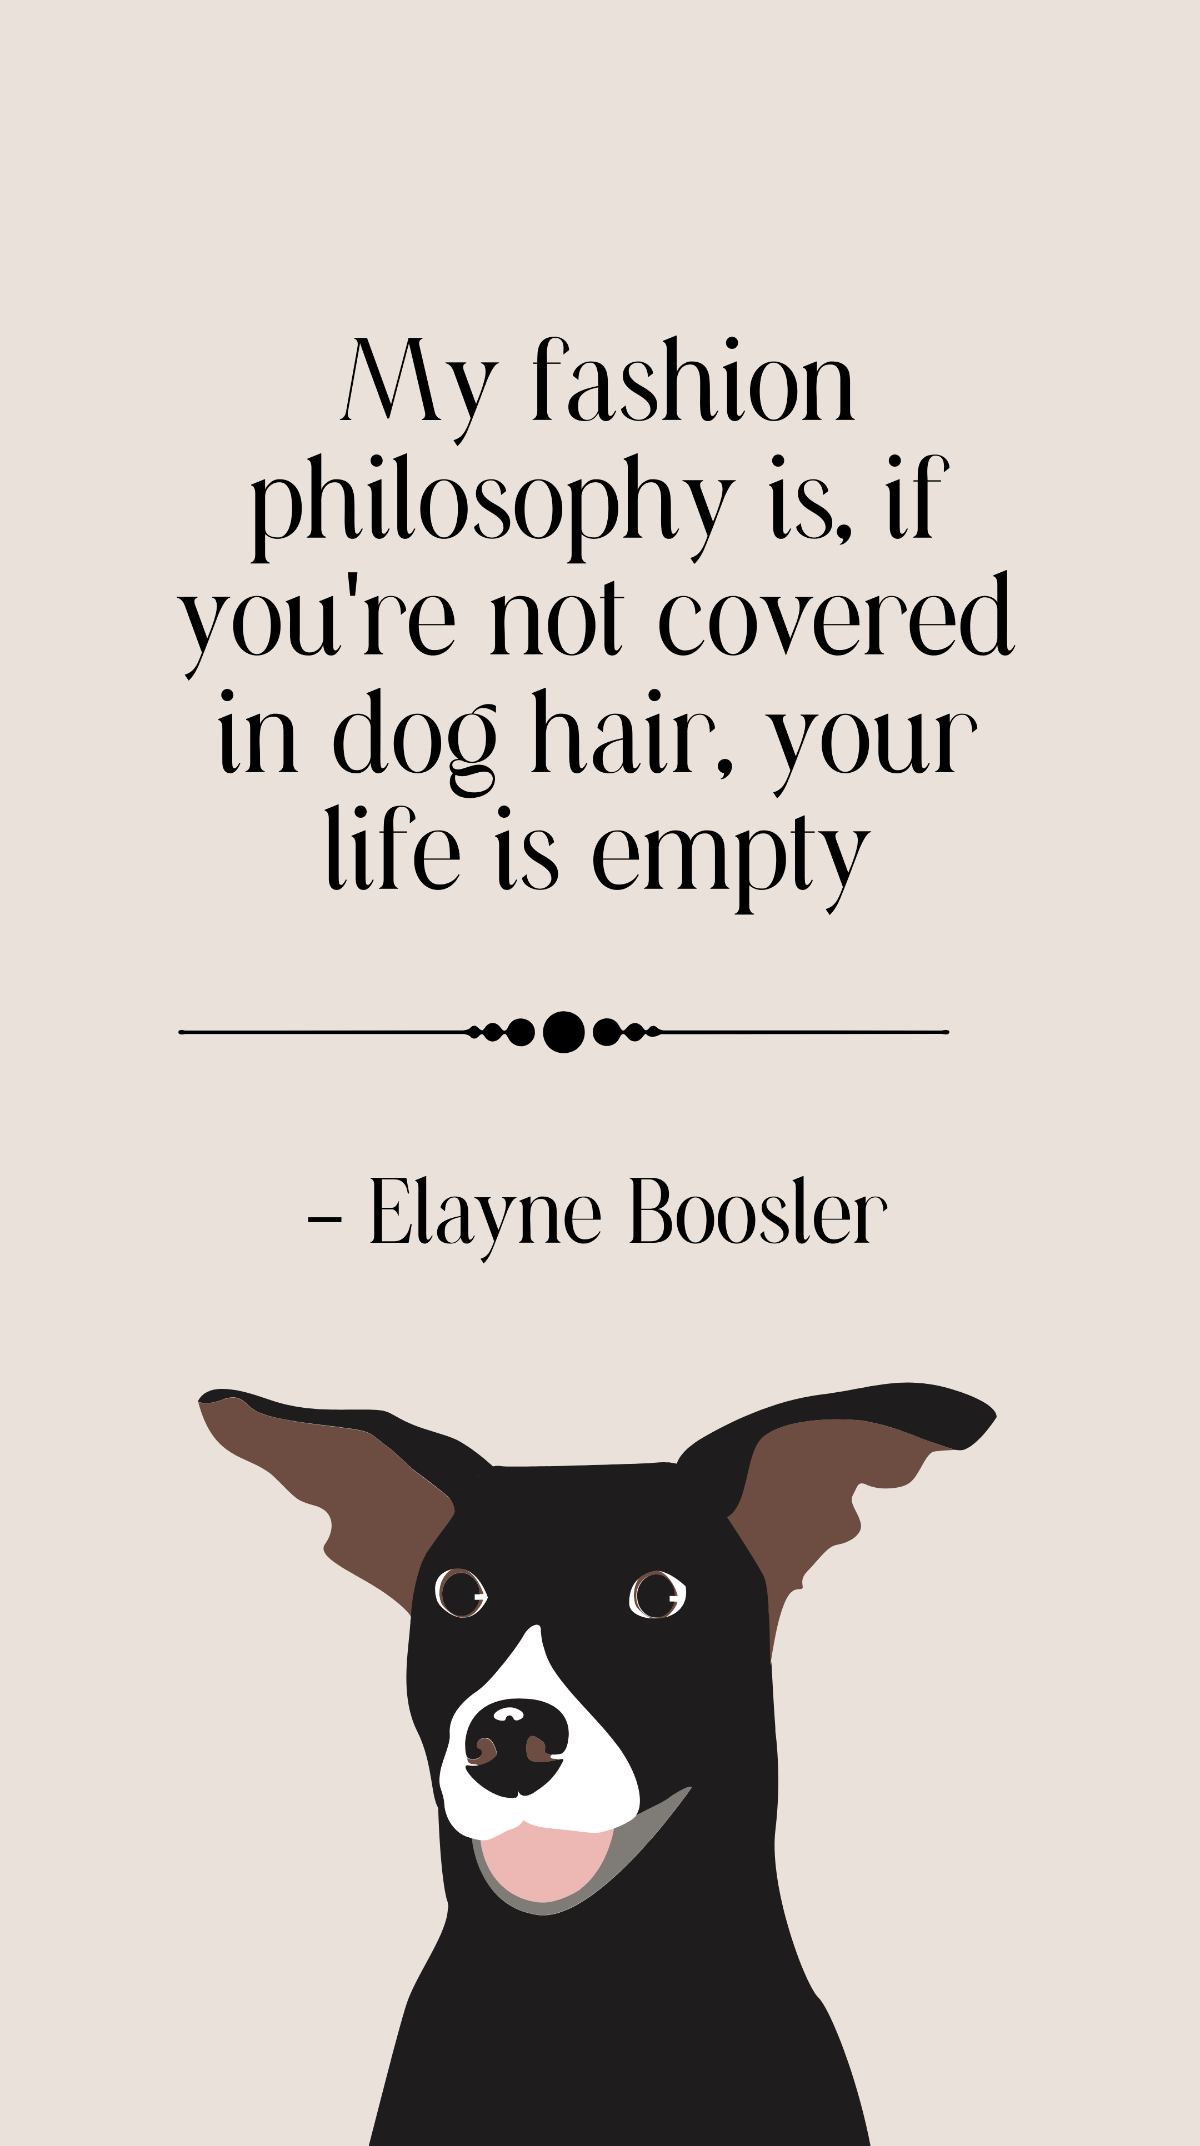 Elayne Boosler - My fashion philosophy is, if you're not covered in dog hair, your life is empty